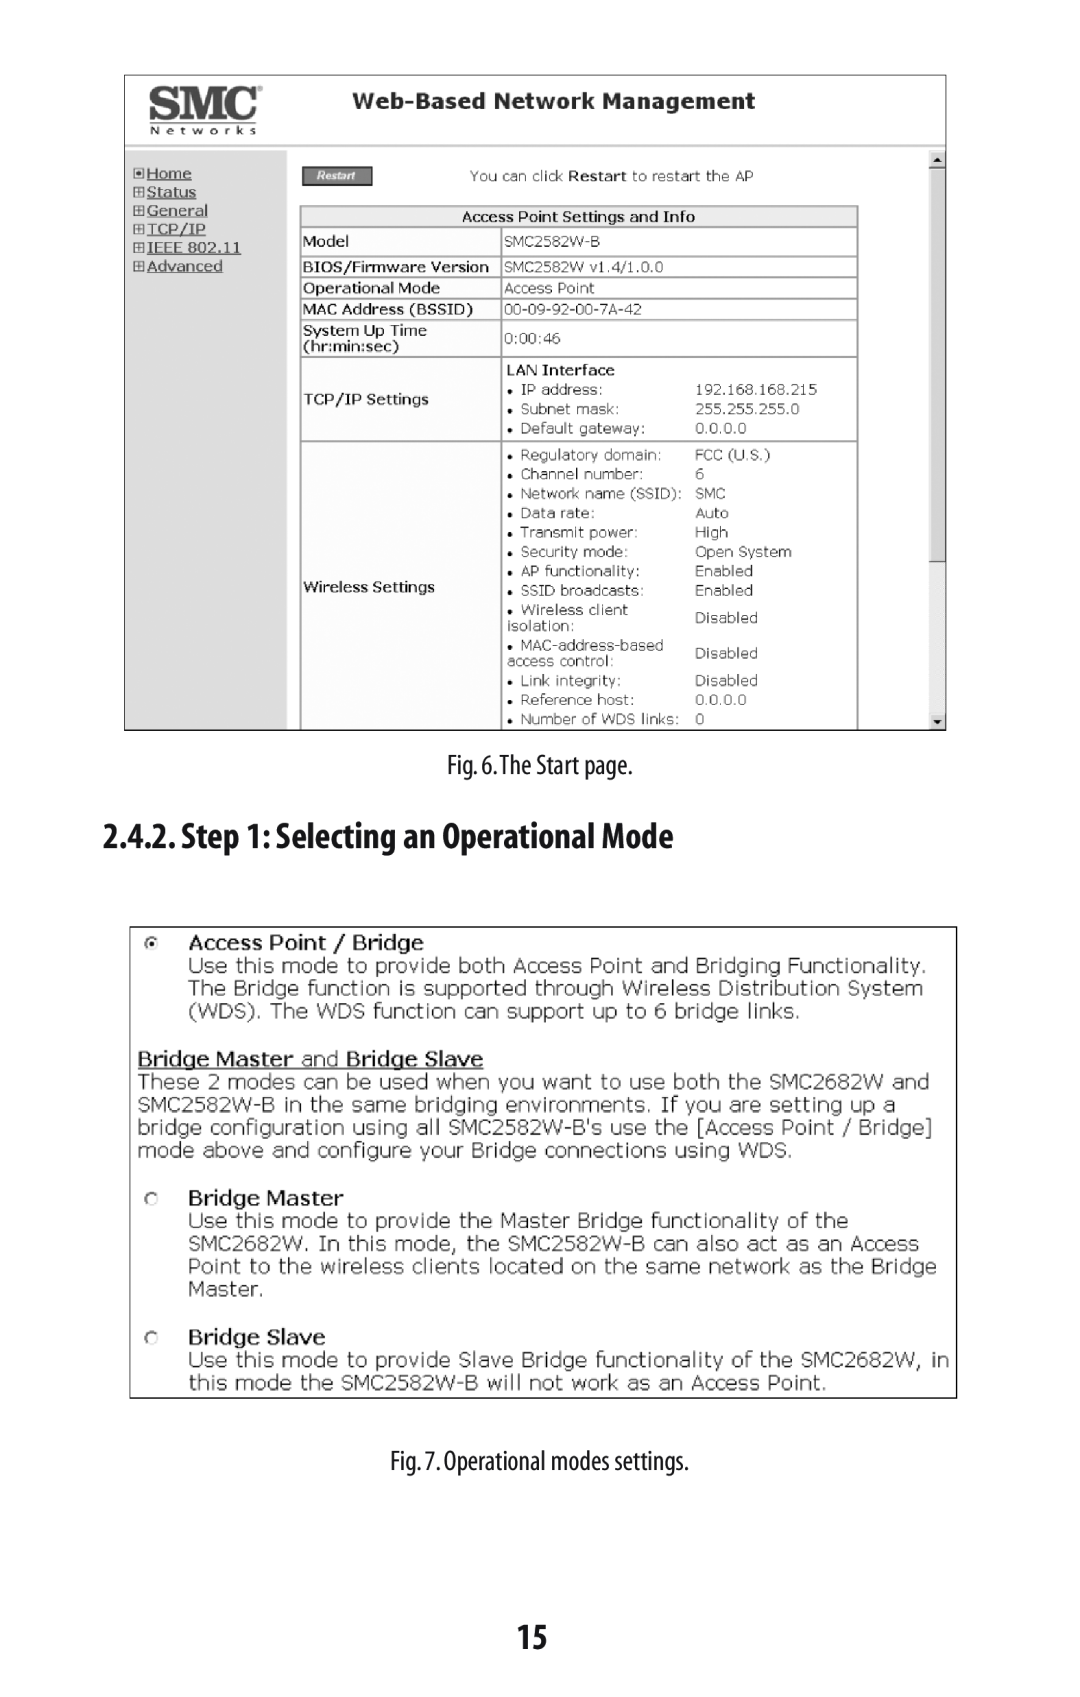 SMC Networks SMC2582W-B manual Selecting an Operational Mode, The Start page, Operational modes settings 